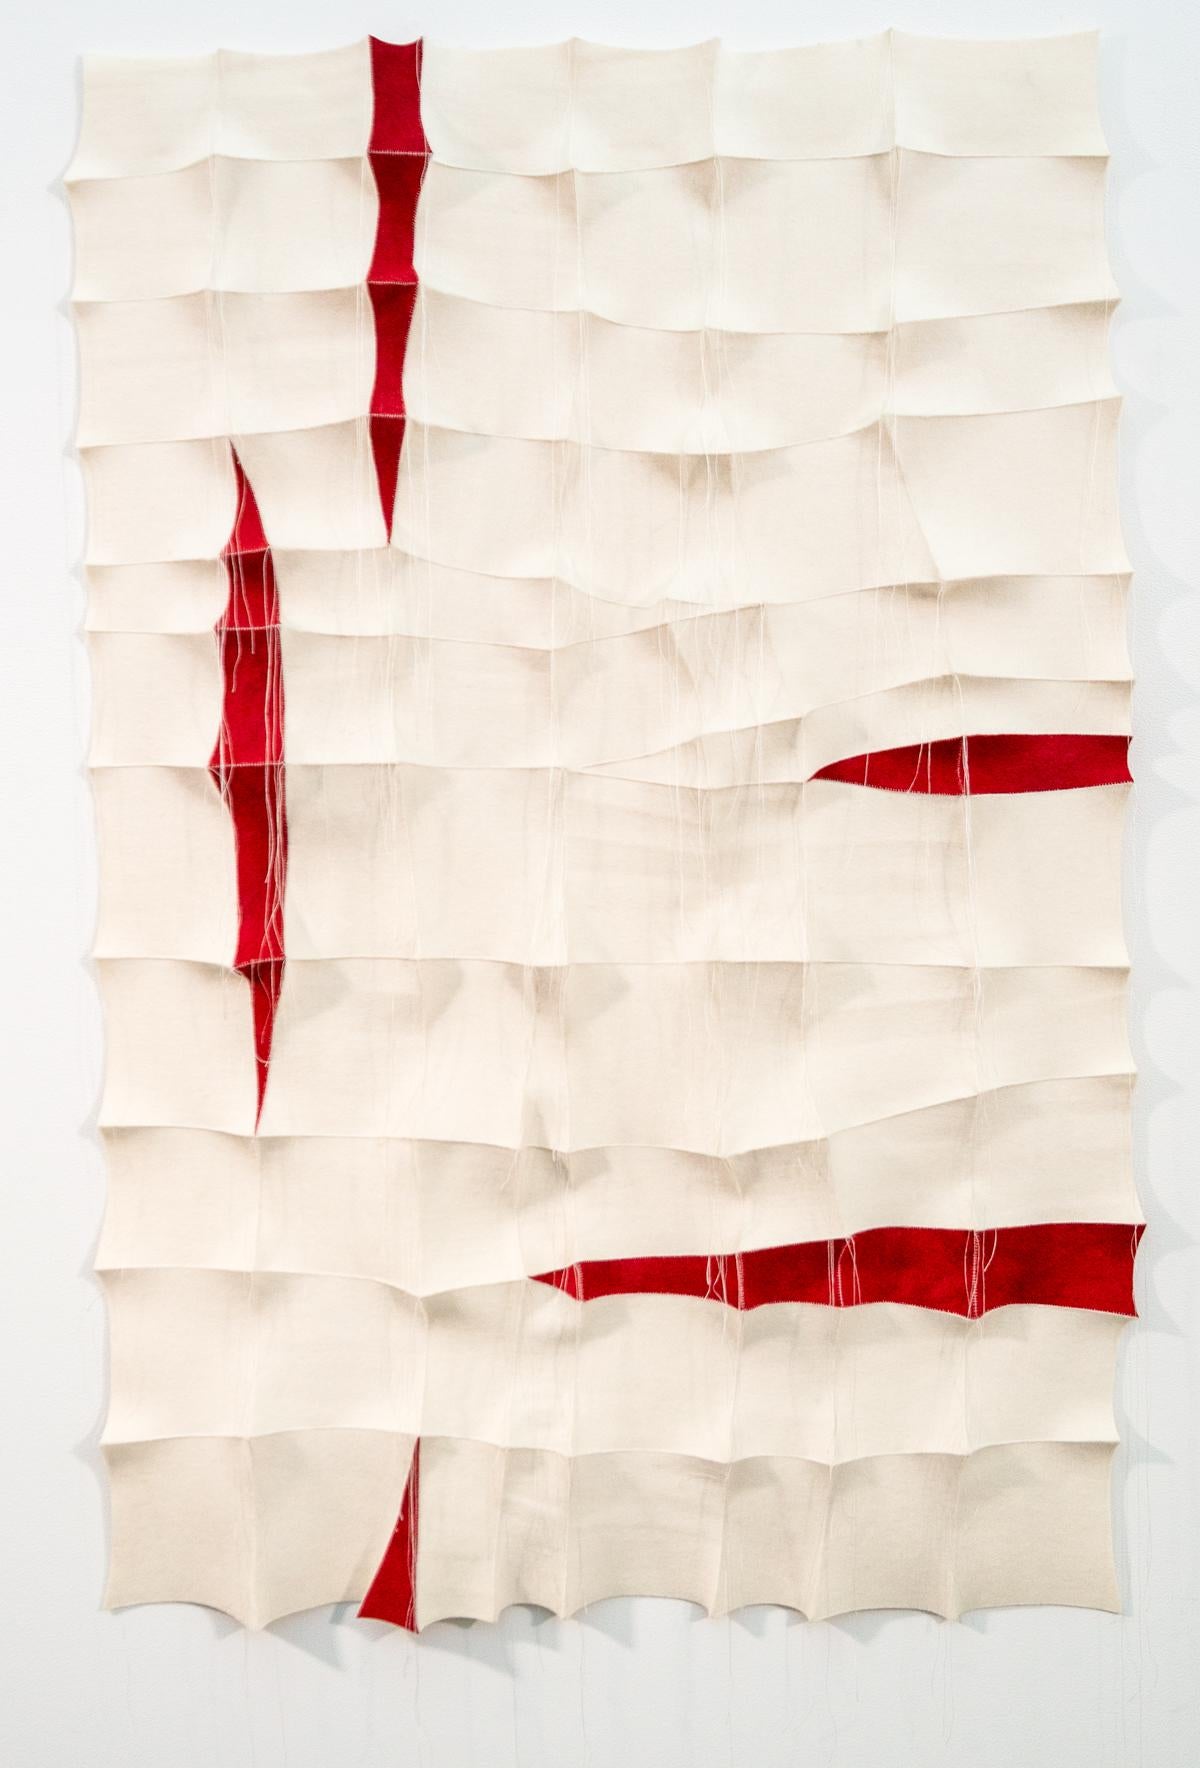 Tumsae No 1 - red, white, pattern, wall hanging, 3D, felt, textile, tapestry - Mixed Media Art by Chung-Im Kim